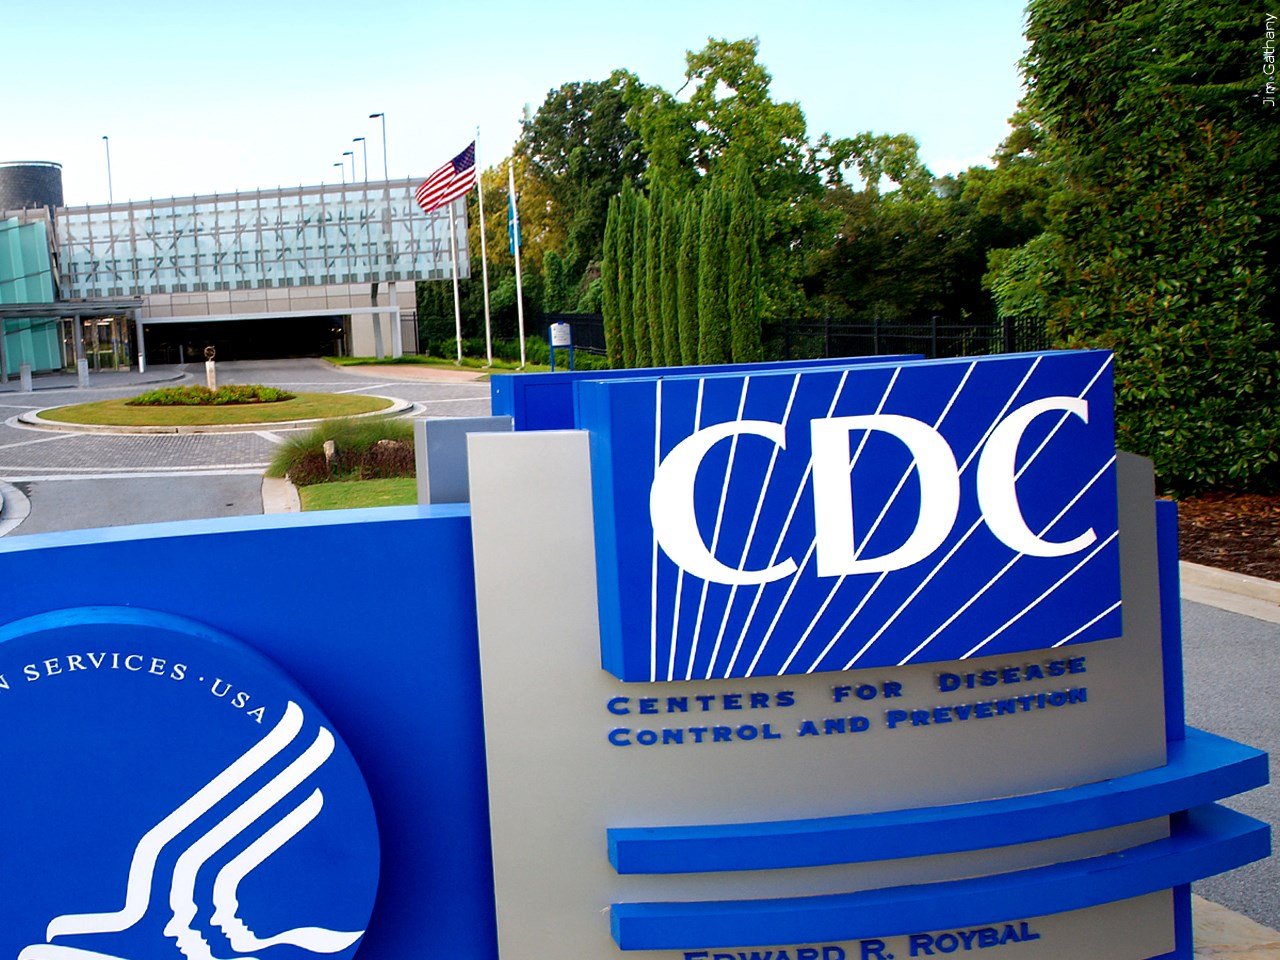 CDC announces Listeria investigation after 16 confirmed cases